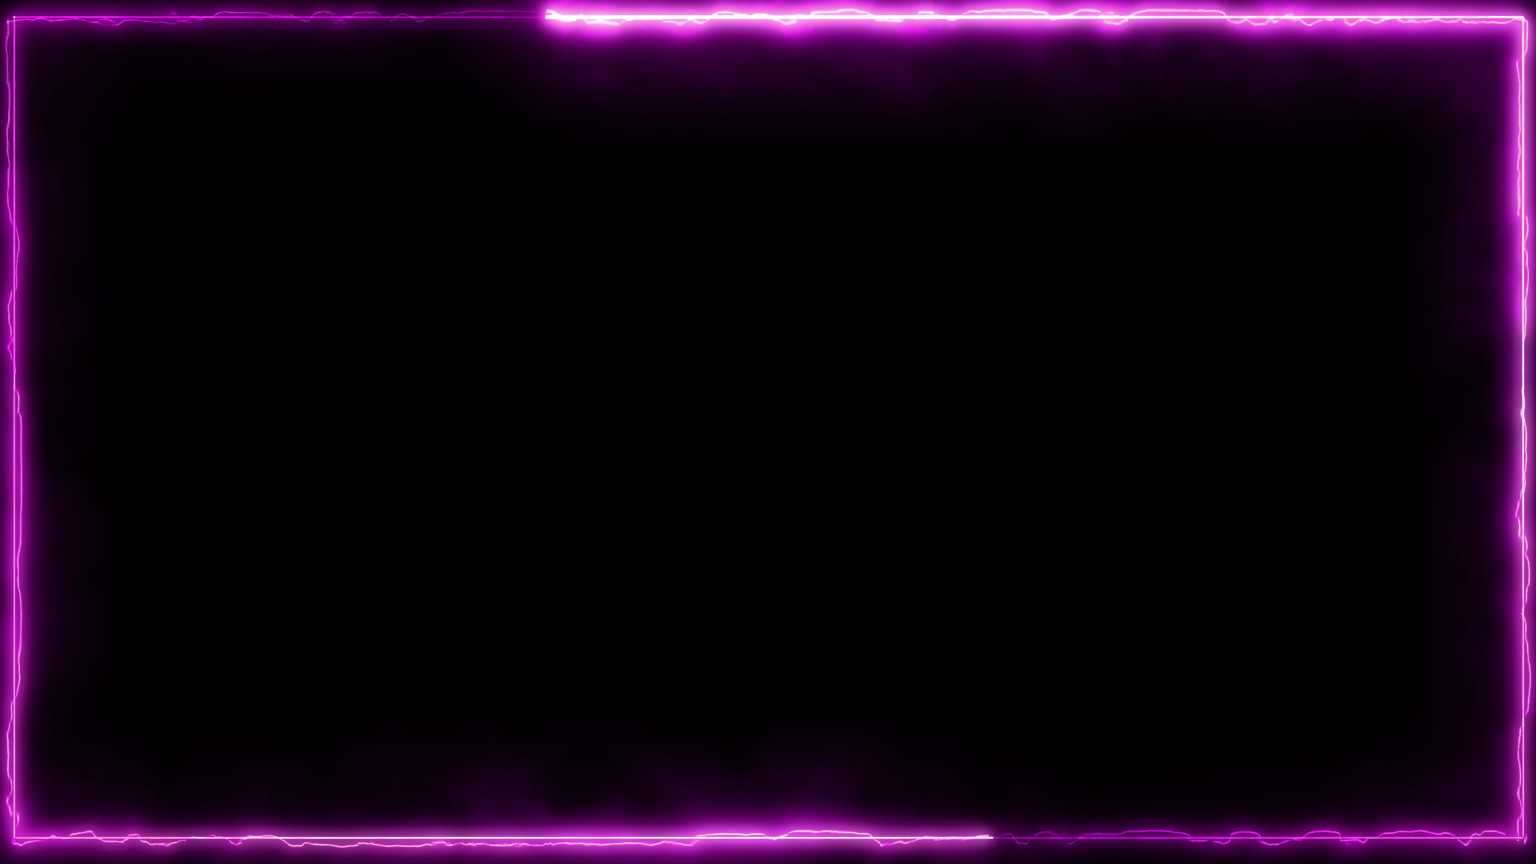 4K Glowing Purple Border Looped Overlay Effect Free Download || Overlay Effect For Editing